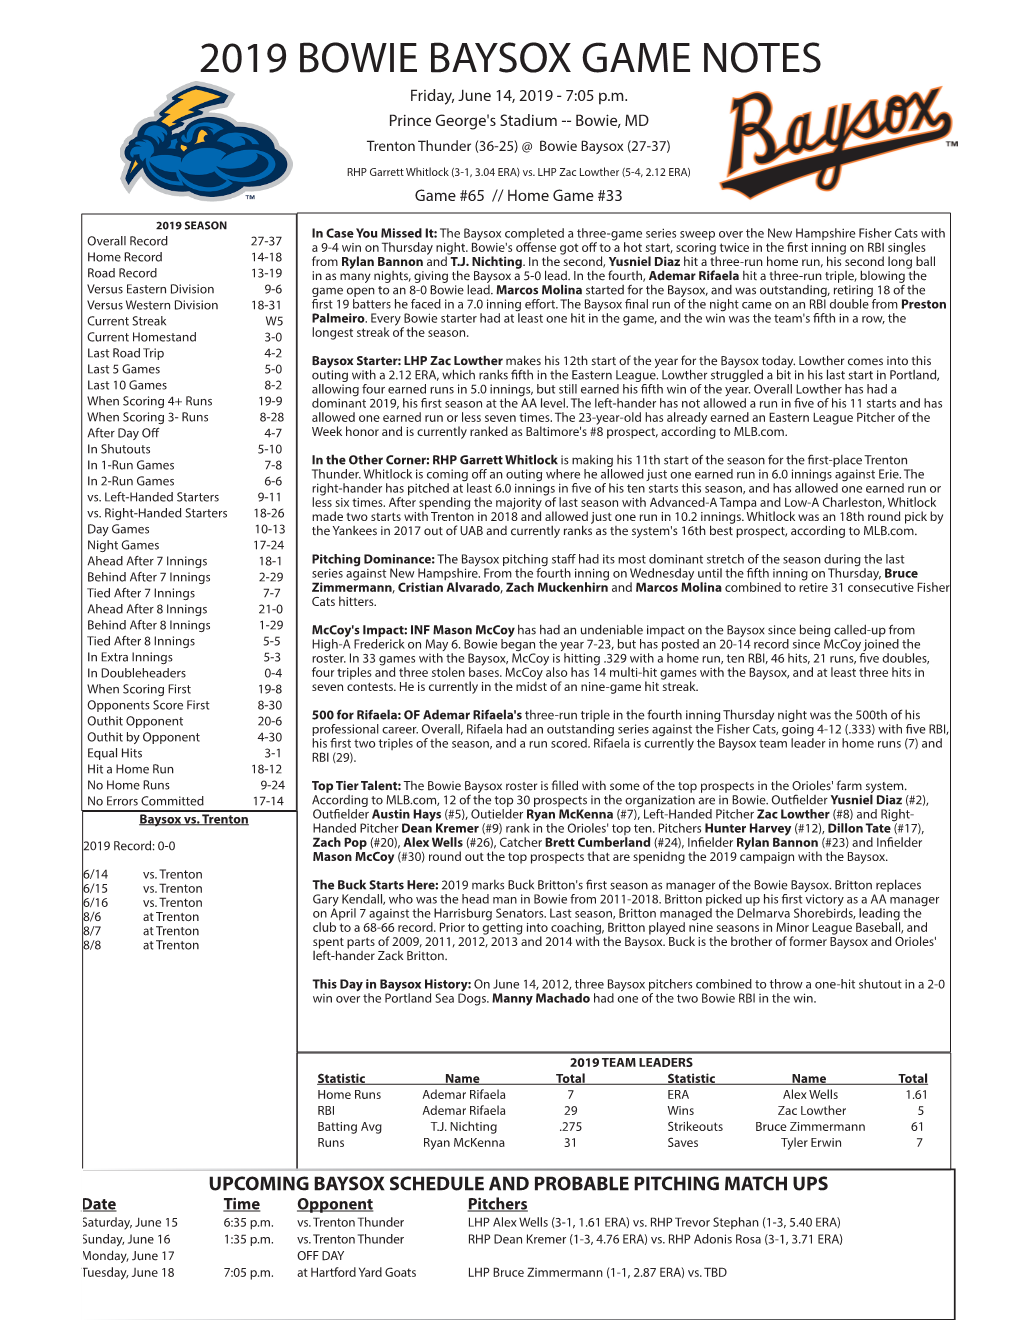 2019 BOWIE BAYSOX GAME NOTES Friday, June 14, 2019 - 7:05 P.M